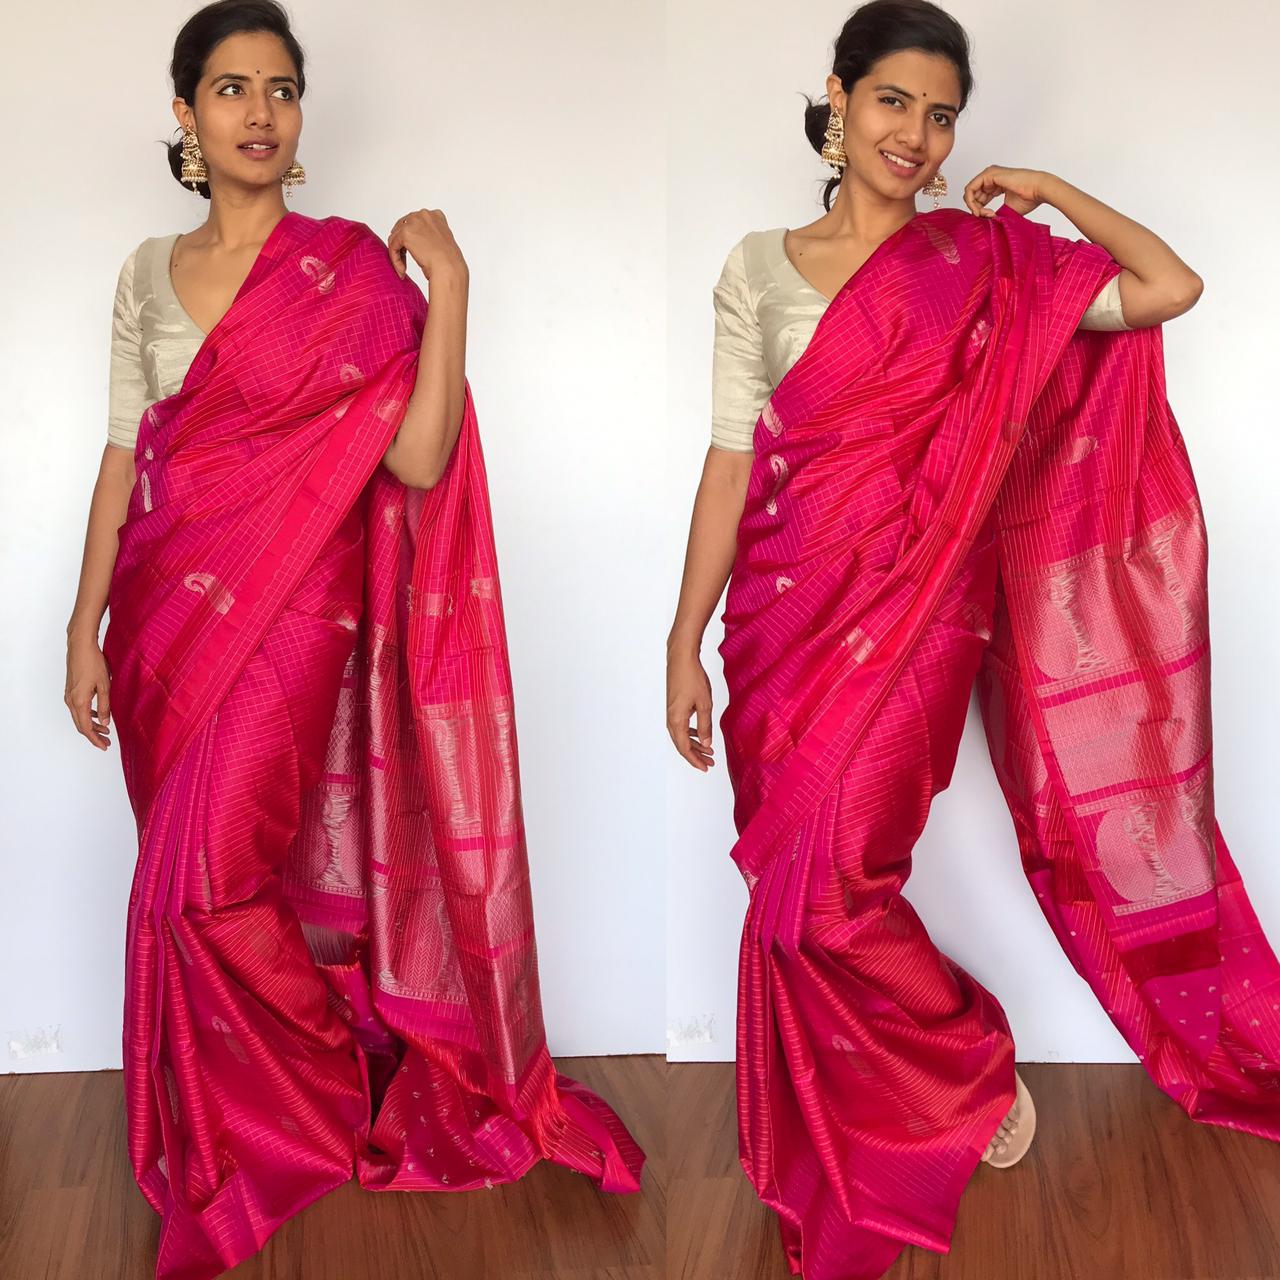 Color Saree - BEST SAREE MATERIALS FOR ALL YOU BEAUTIES  😍https://colorsaree.com/6-different-types-of-saree-material-and-saree-manufacturing-process/.  There are many famous and popular saree materials that are light,cool and  easy to wear which are used ...